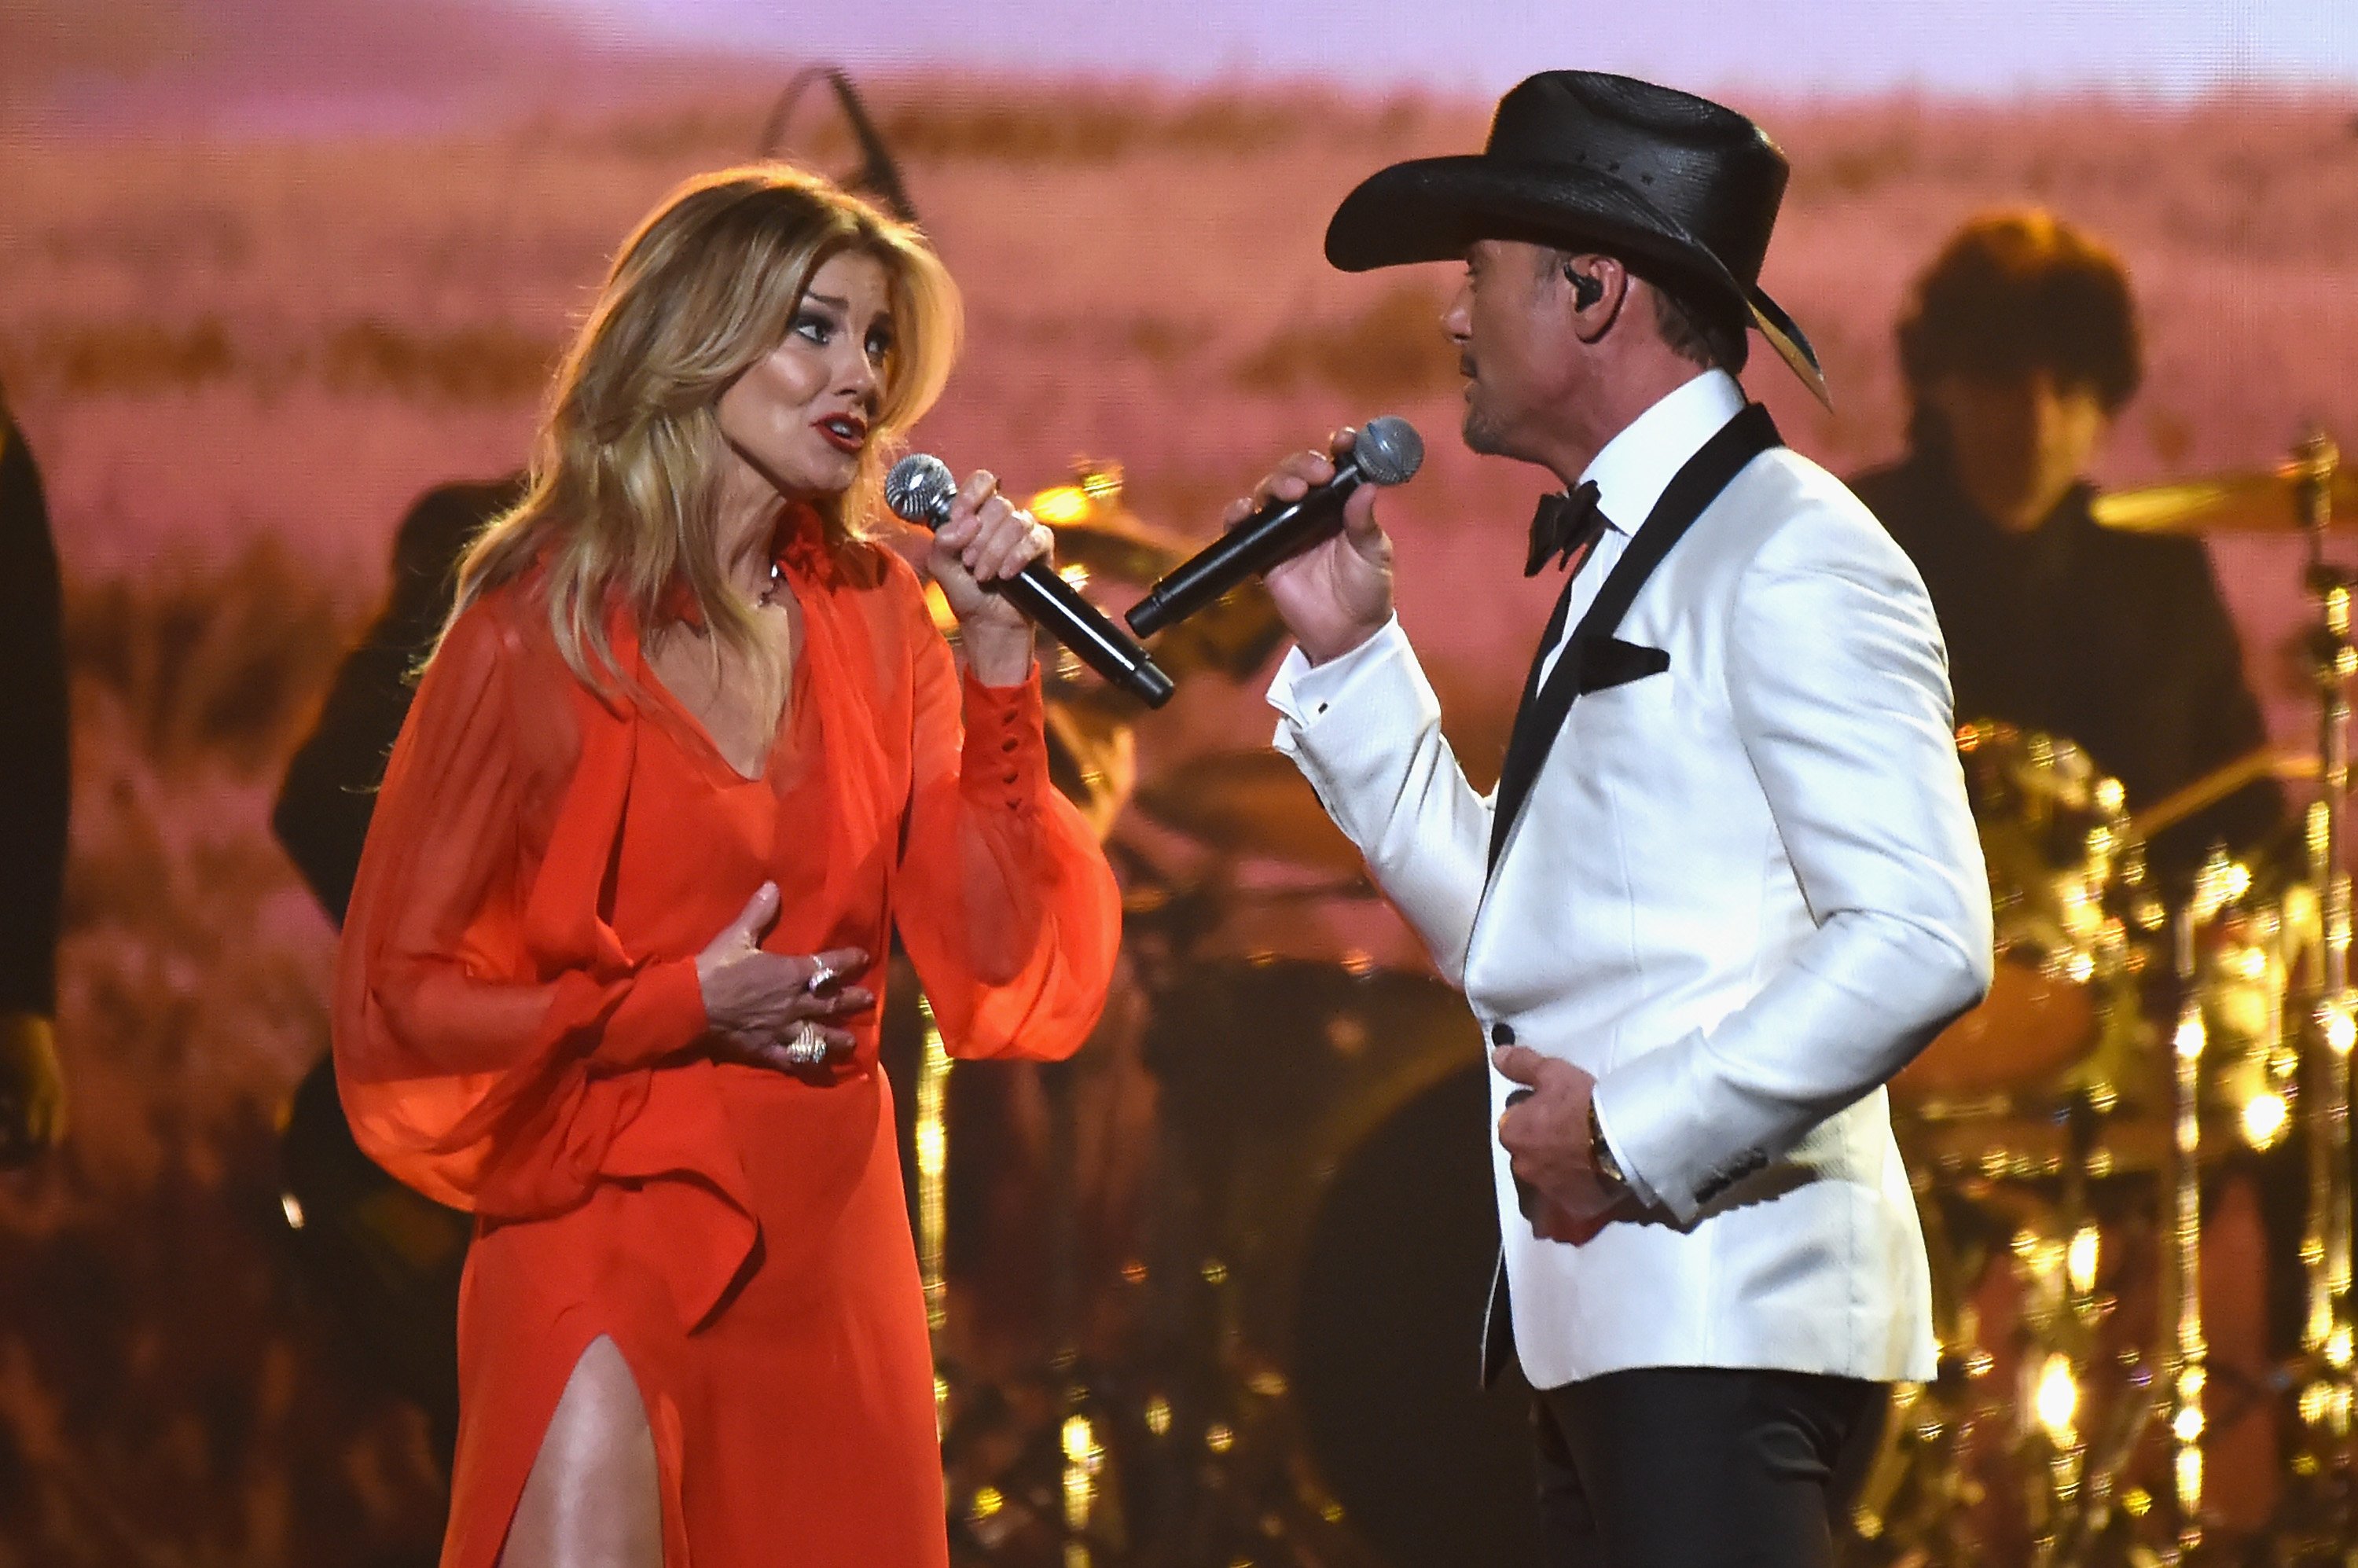 Faith Hill and Tim McGraw perform onstage at the 51st annual CMA Awards at the Bridgestone Arena on November 8, 2017 in Nashville, Tennessee.  | Photo: Getty Images